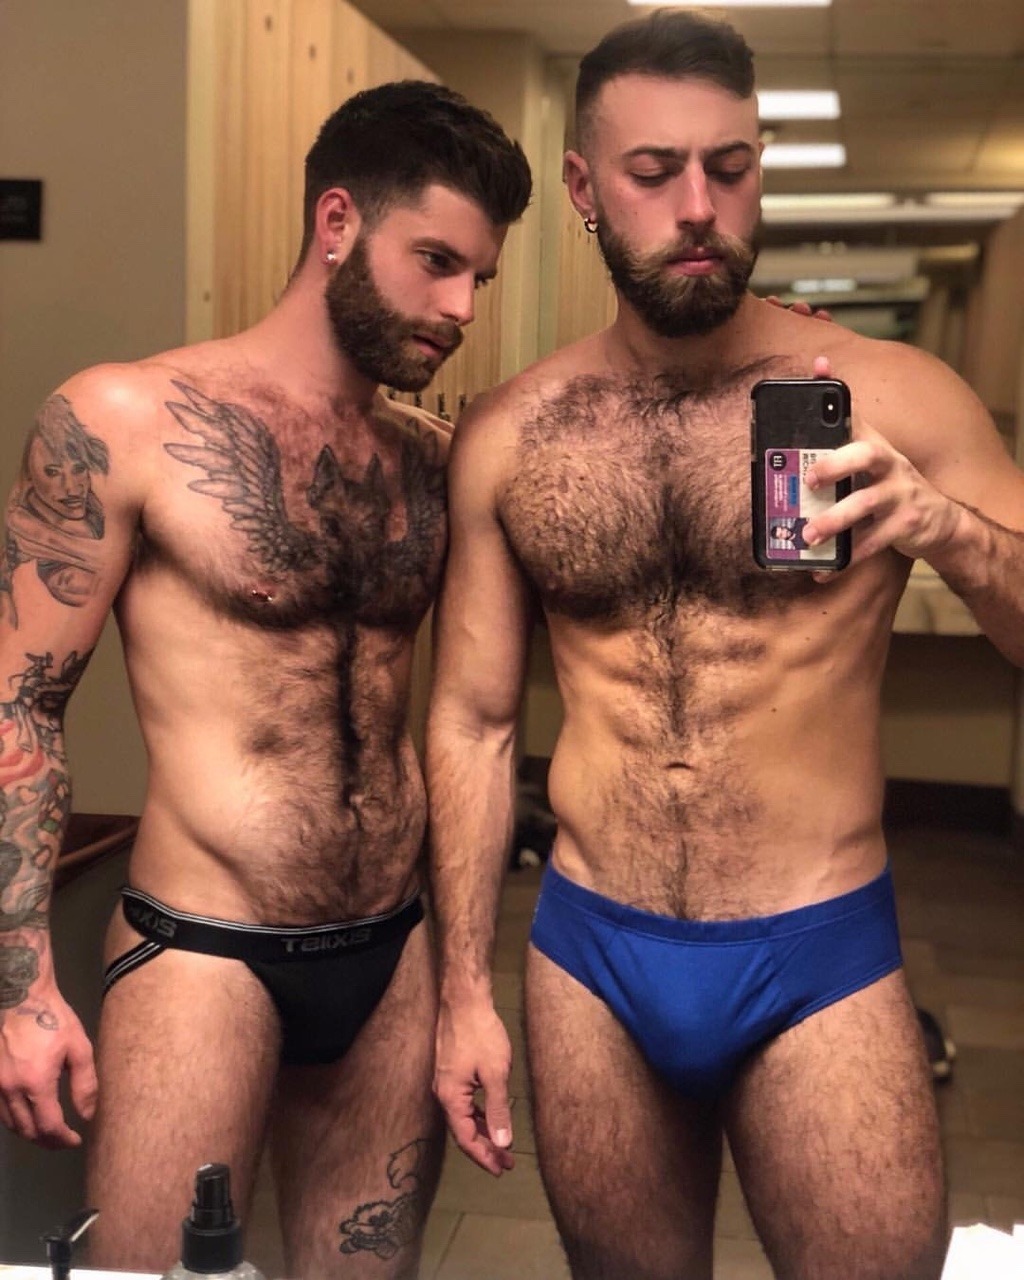 Imagine you’re a tag team and step into the ring and on the other side are these 2 hairy chested, bearded beasts!!! Oh fuck, they look like they will sweat like a hungry animal, and both look like they stop at nothing to cheat, destroy, humiliate,...